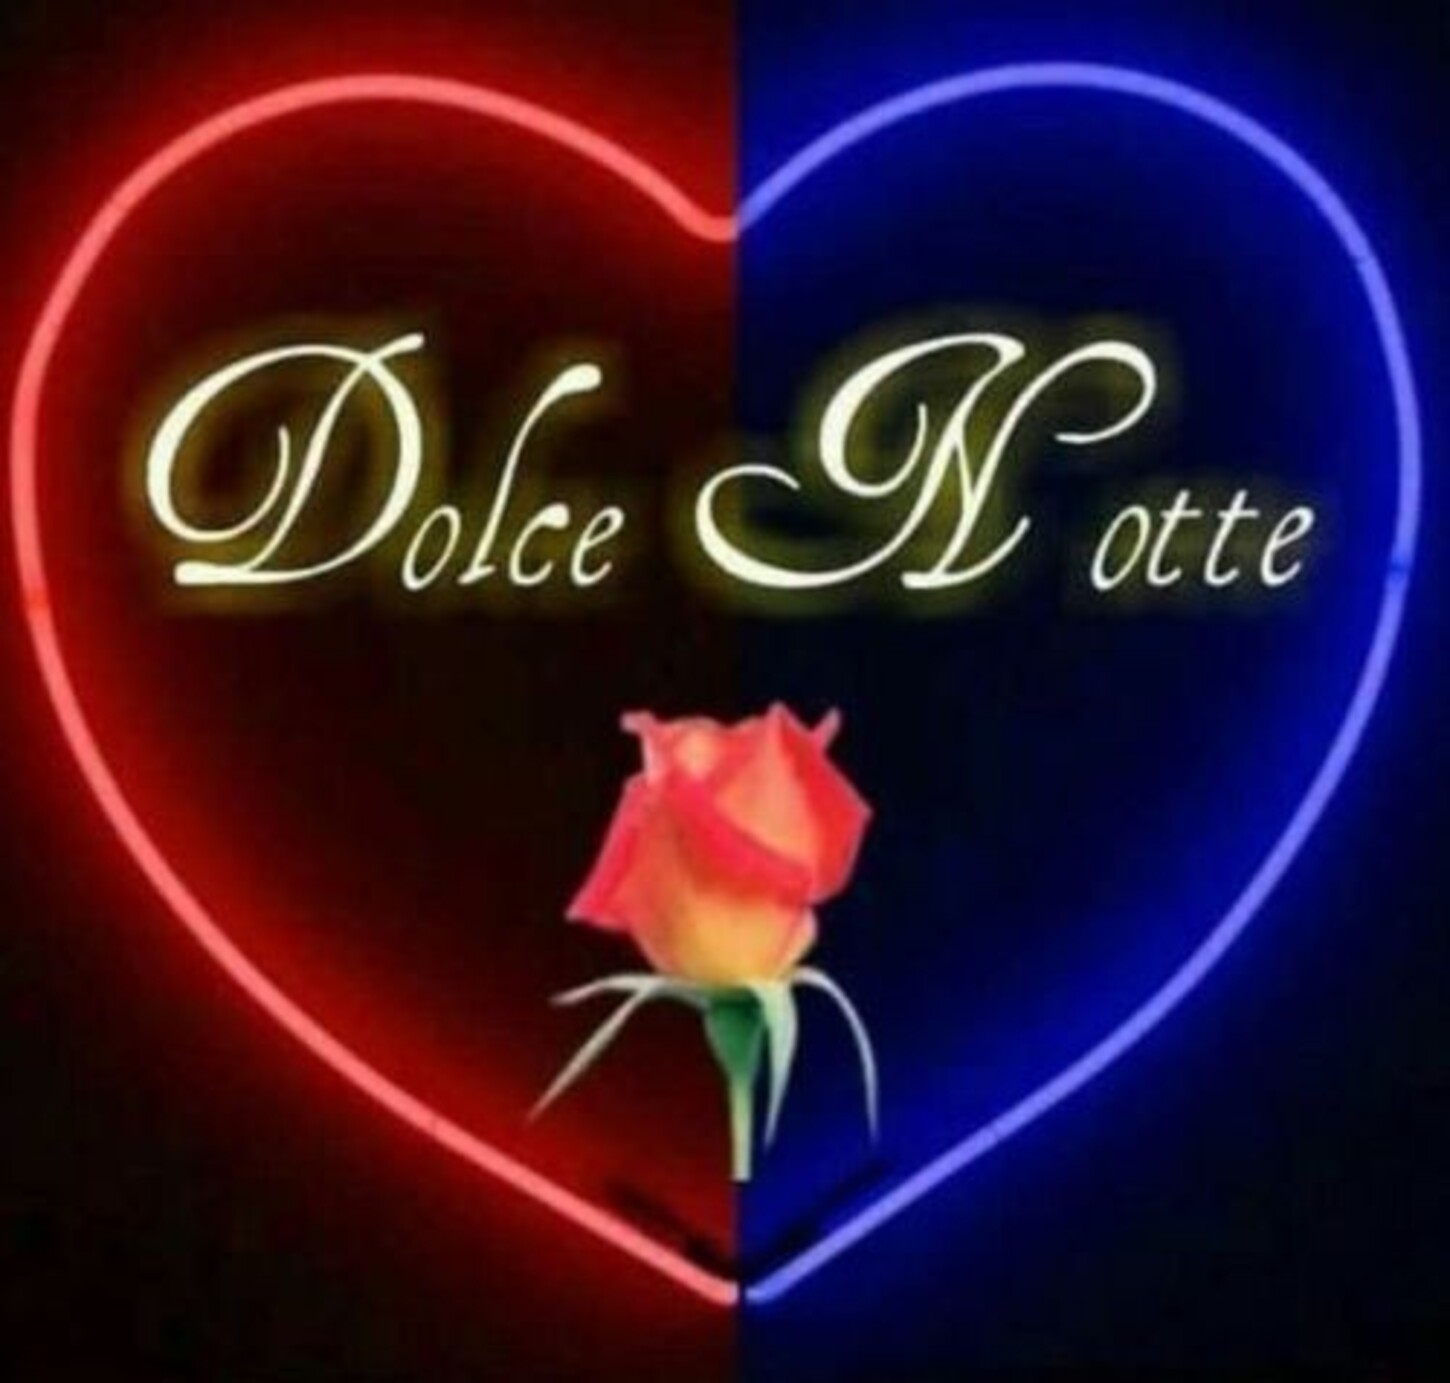 Dolce Notte Amore